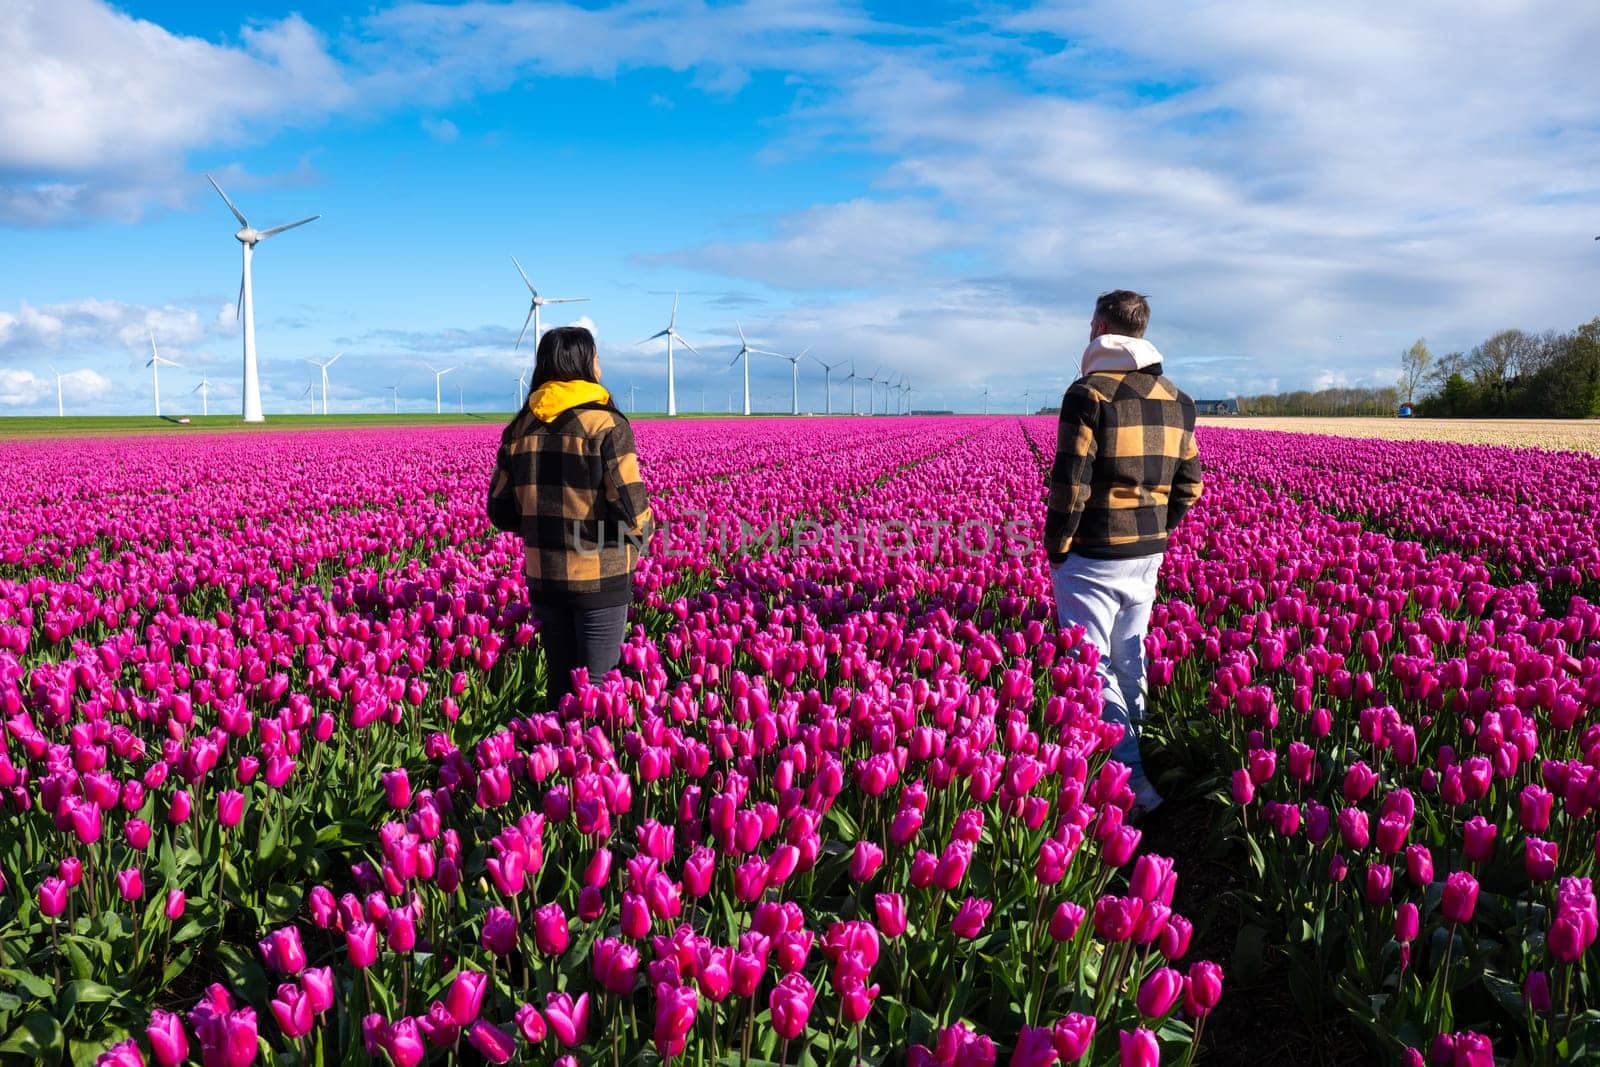 Two individuals peacefully walk through a vibrant field of purple tulips, surrounded by the beauty of nature in full bloom under a clear sky by fokkebok